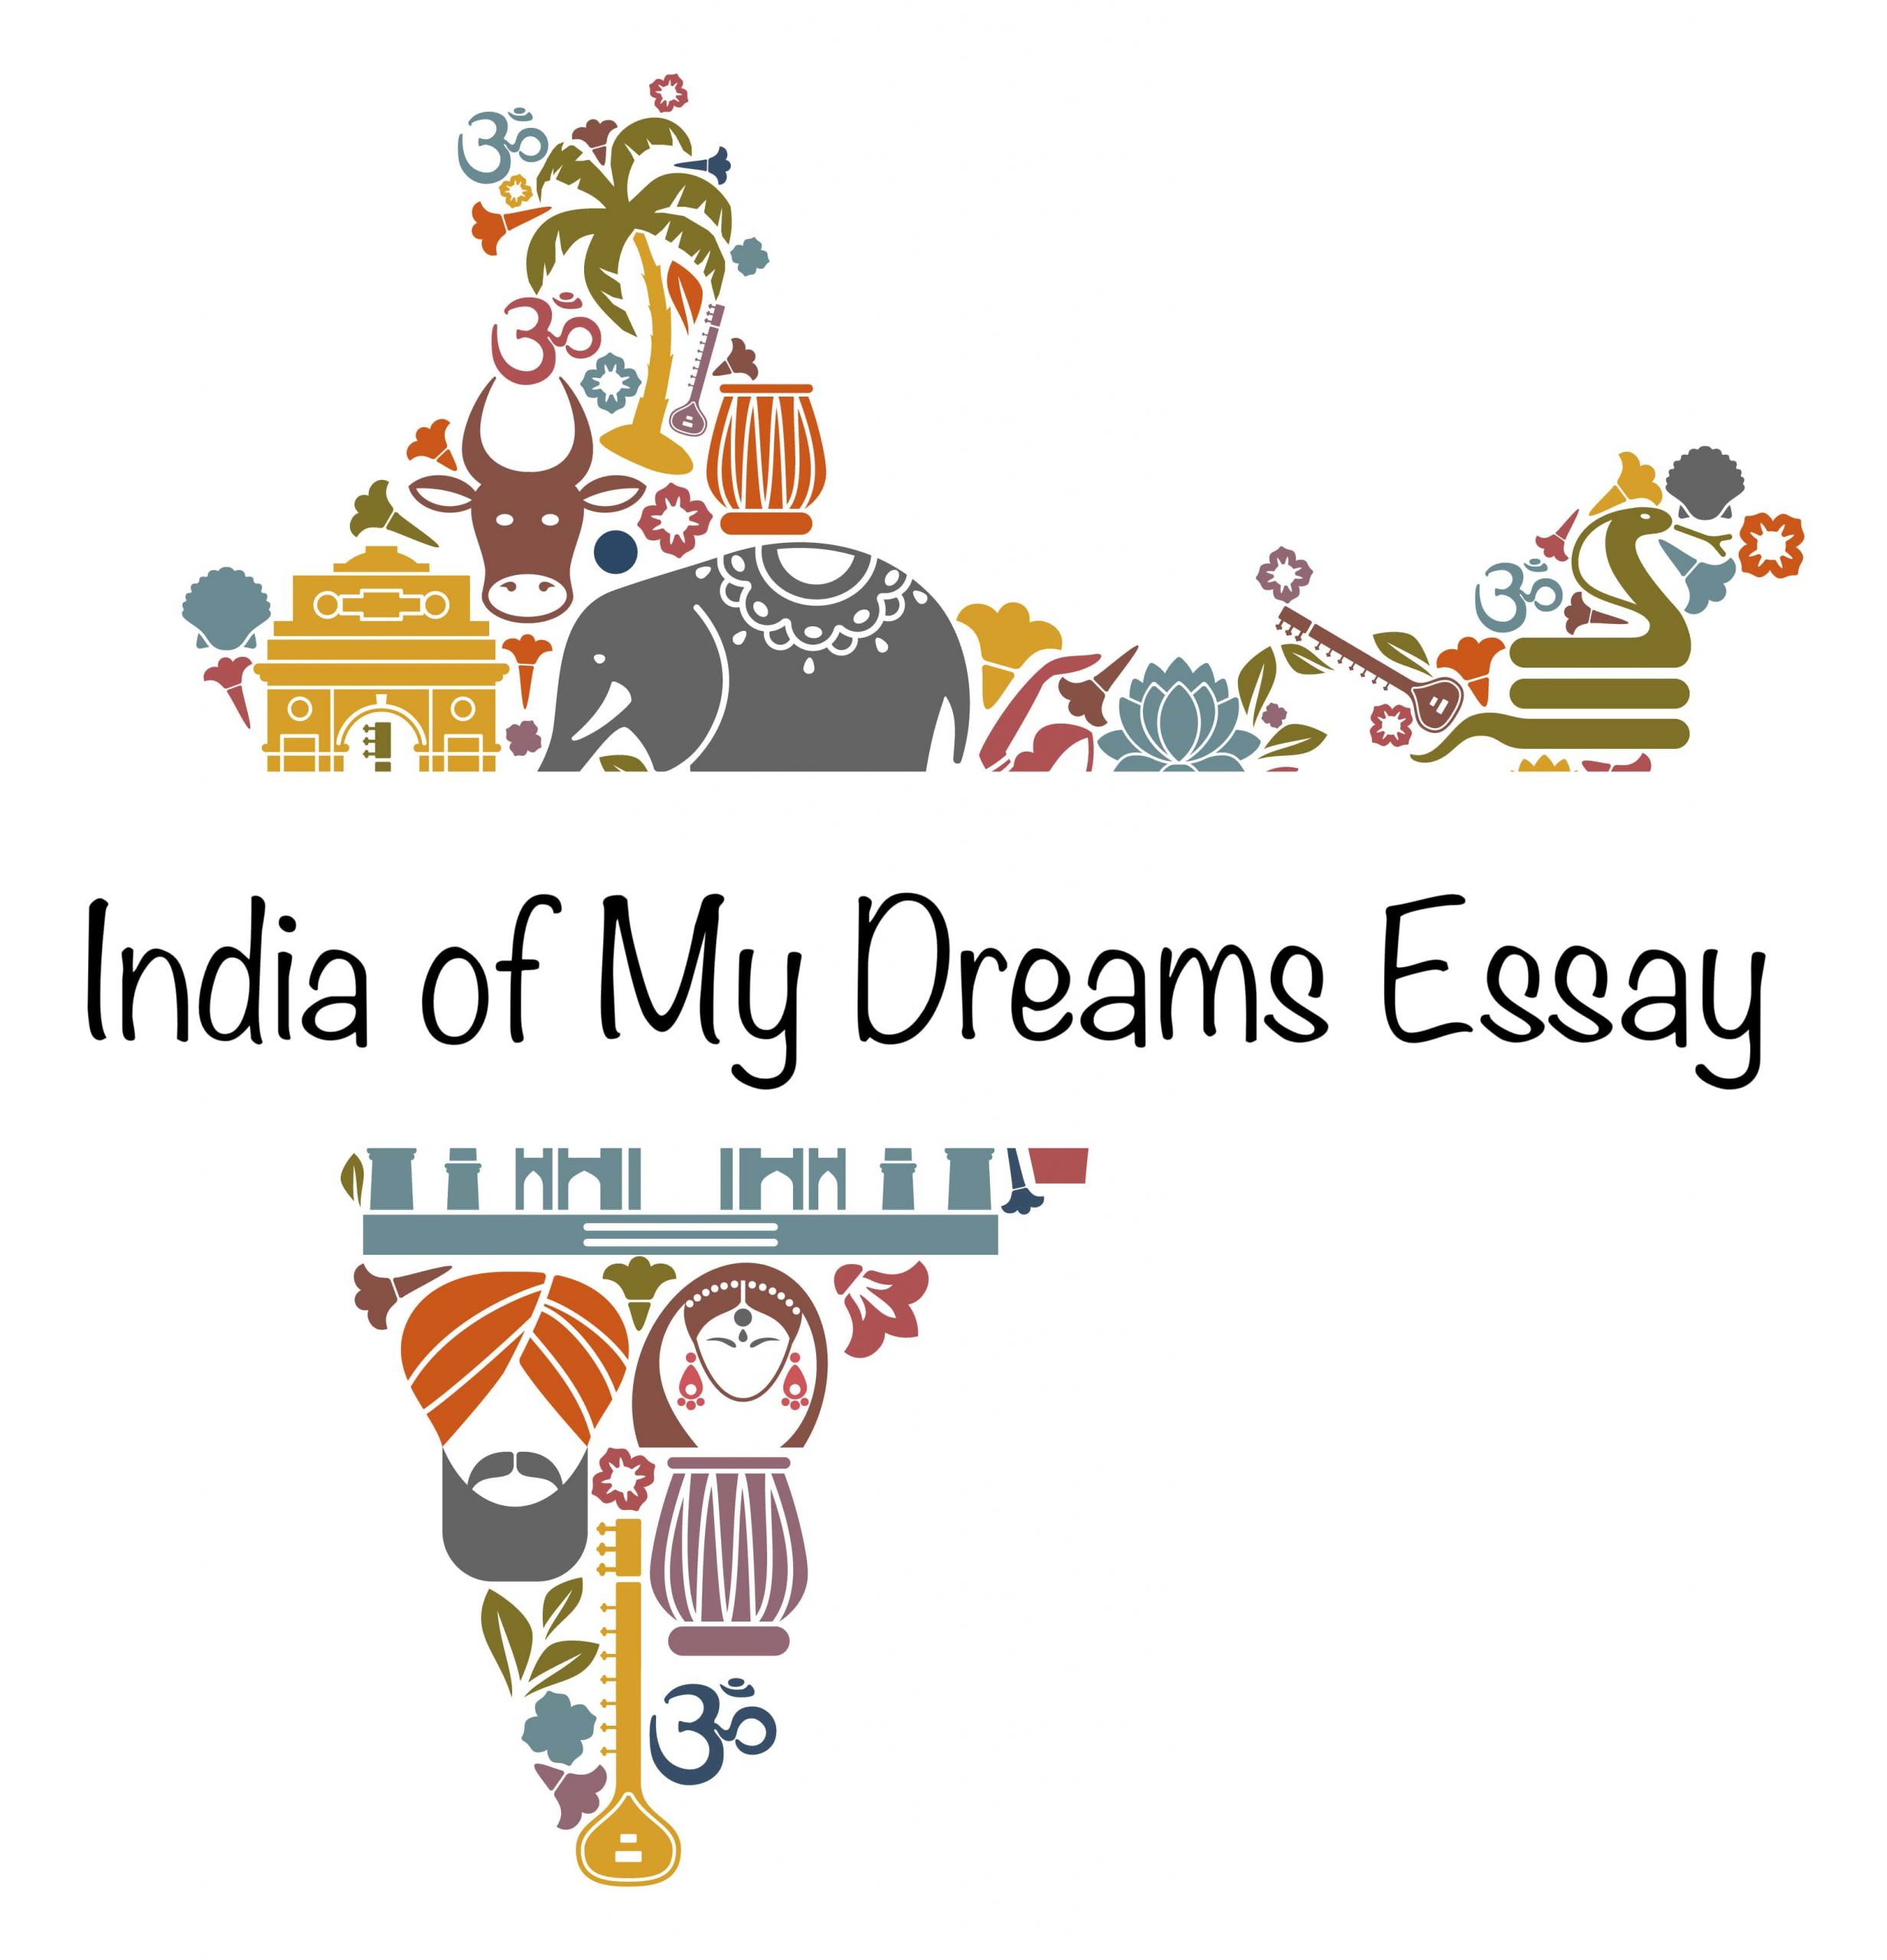 essay on the india of my dreams